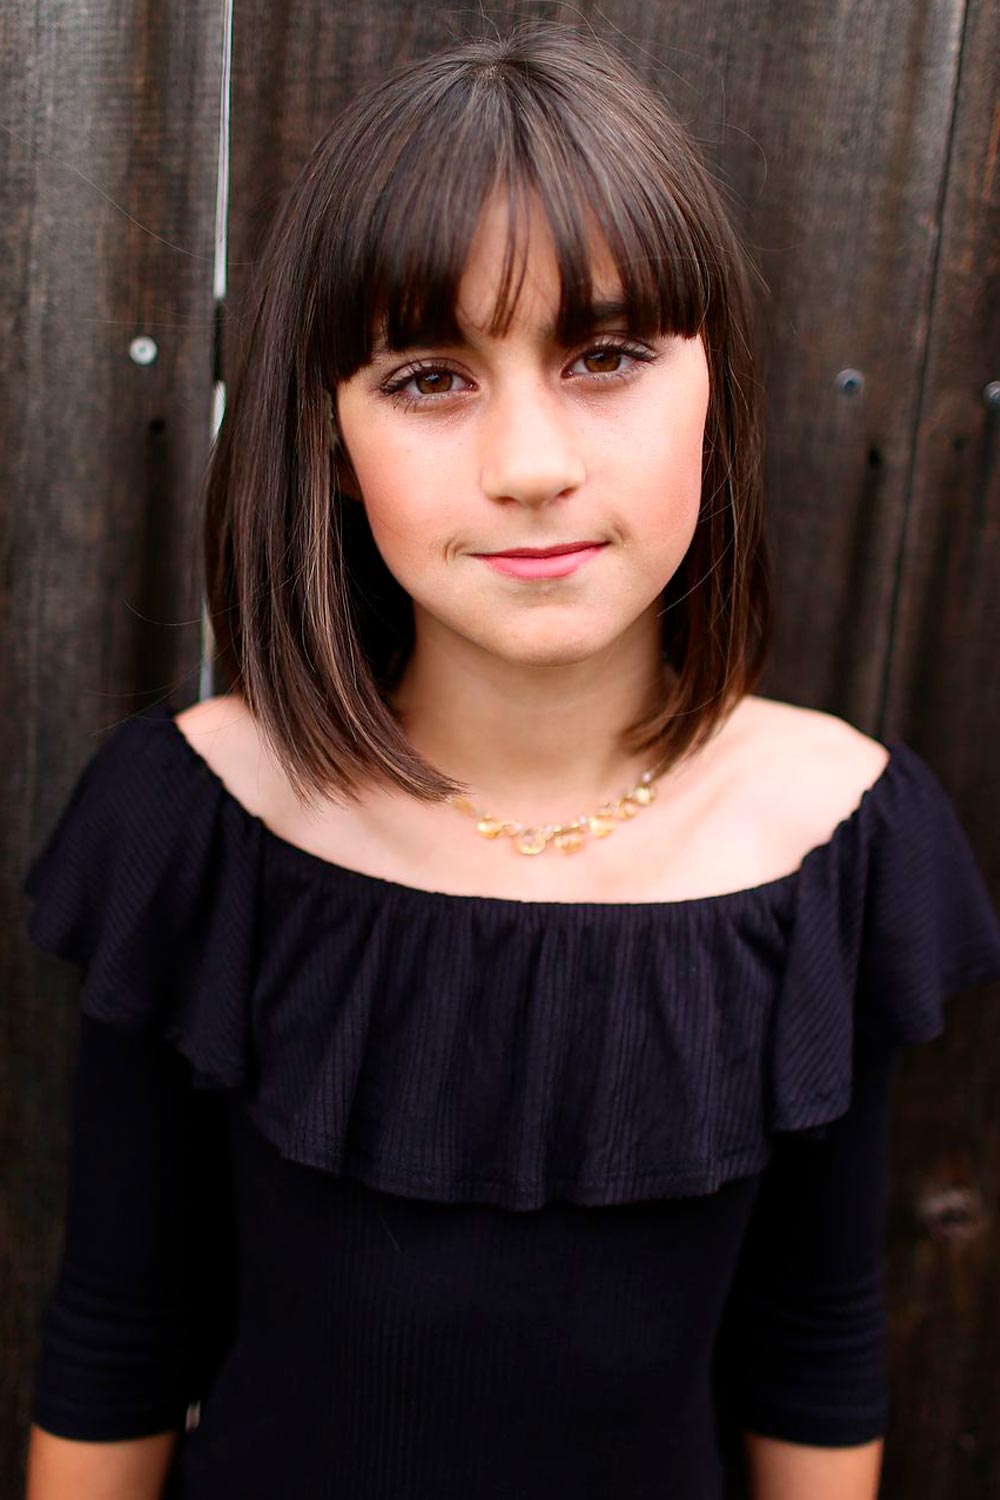 Lob Haircut with Arched Bangs